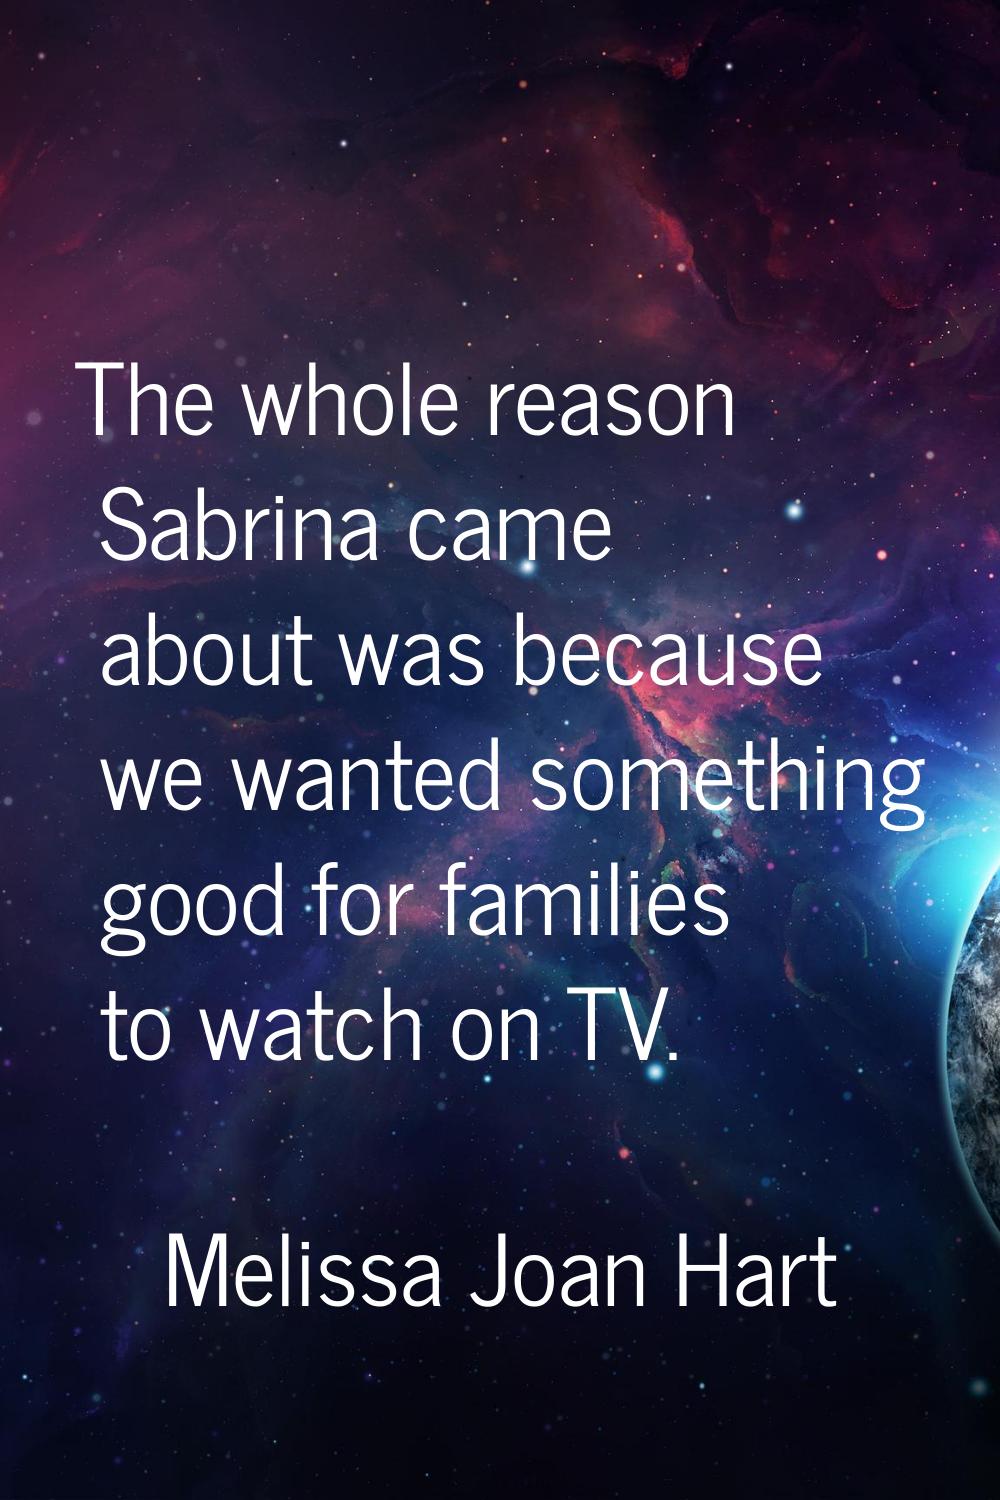 The whole reason Sabrina came about was because we wanted something good for families to watch on T